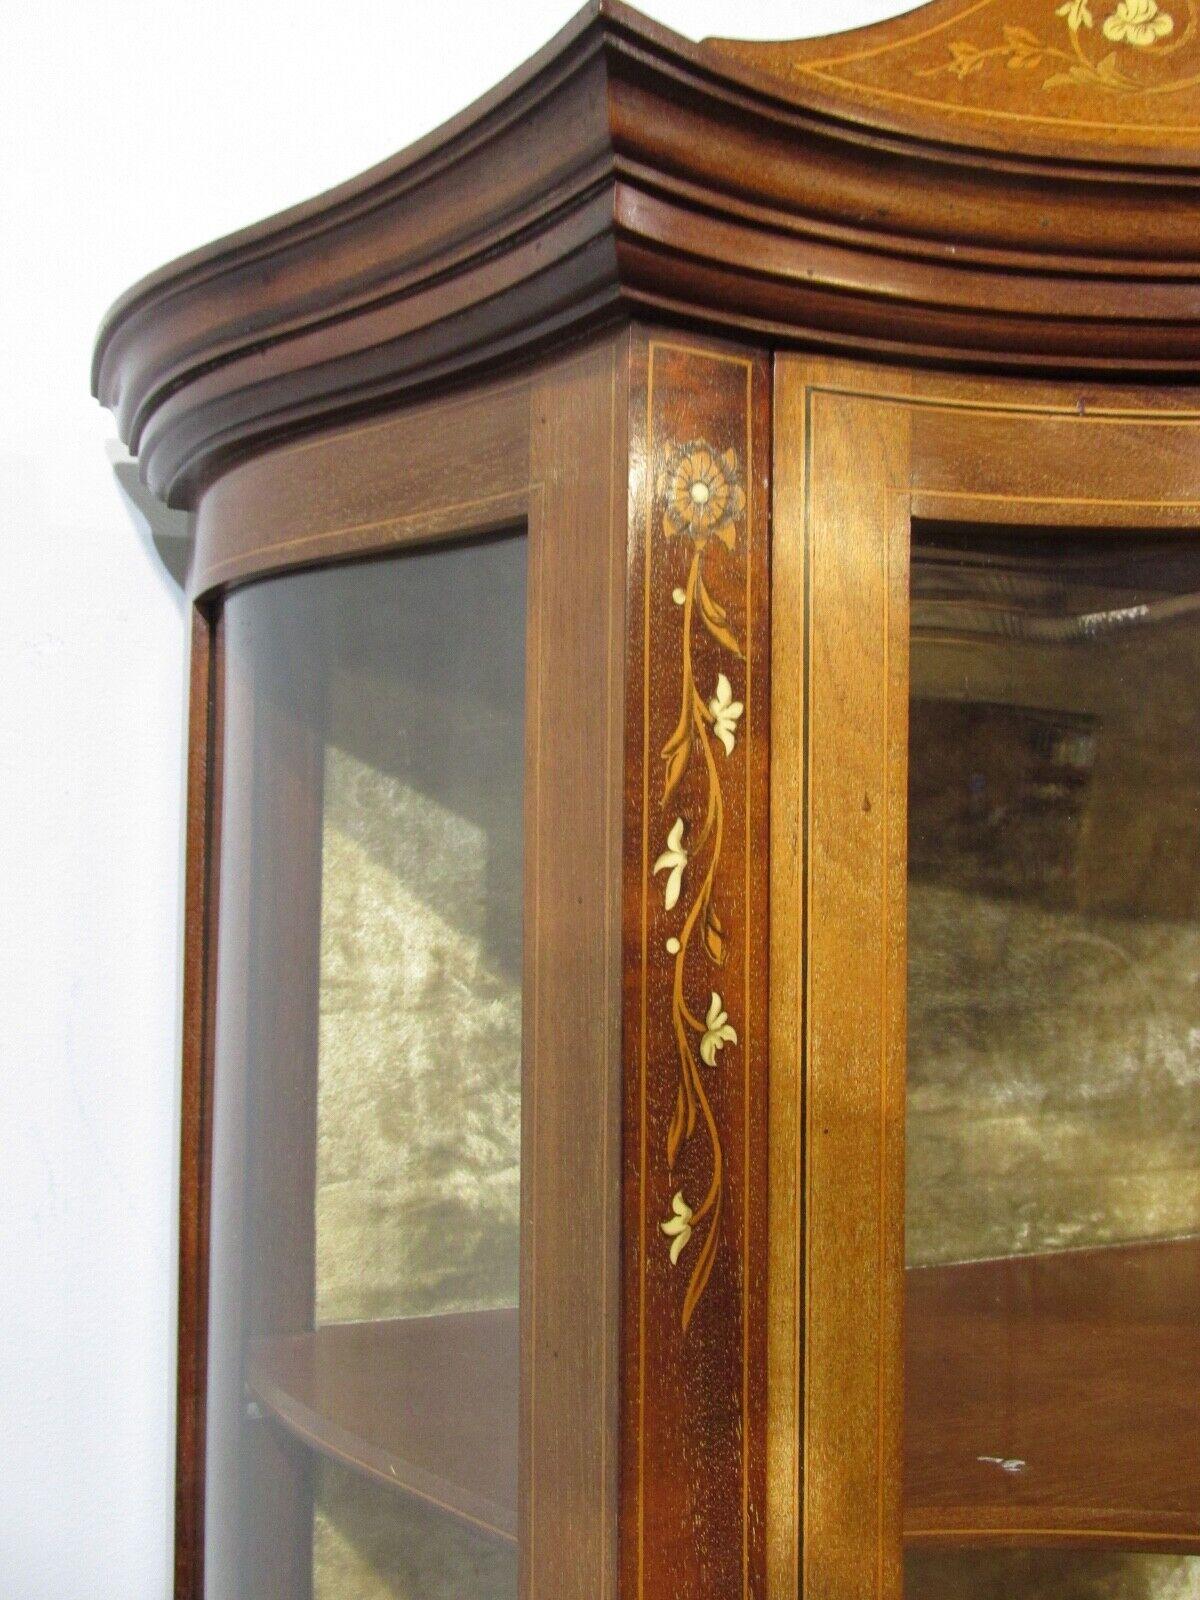 Edwardian Display Cabinet Bookcase Inlay 1900 Mahogany In Good Condition For Sale In Potters Bar, GB